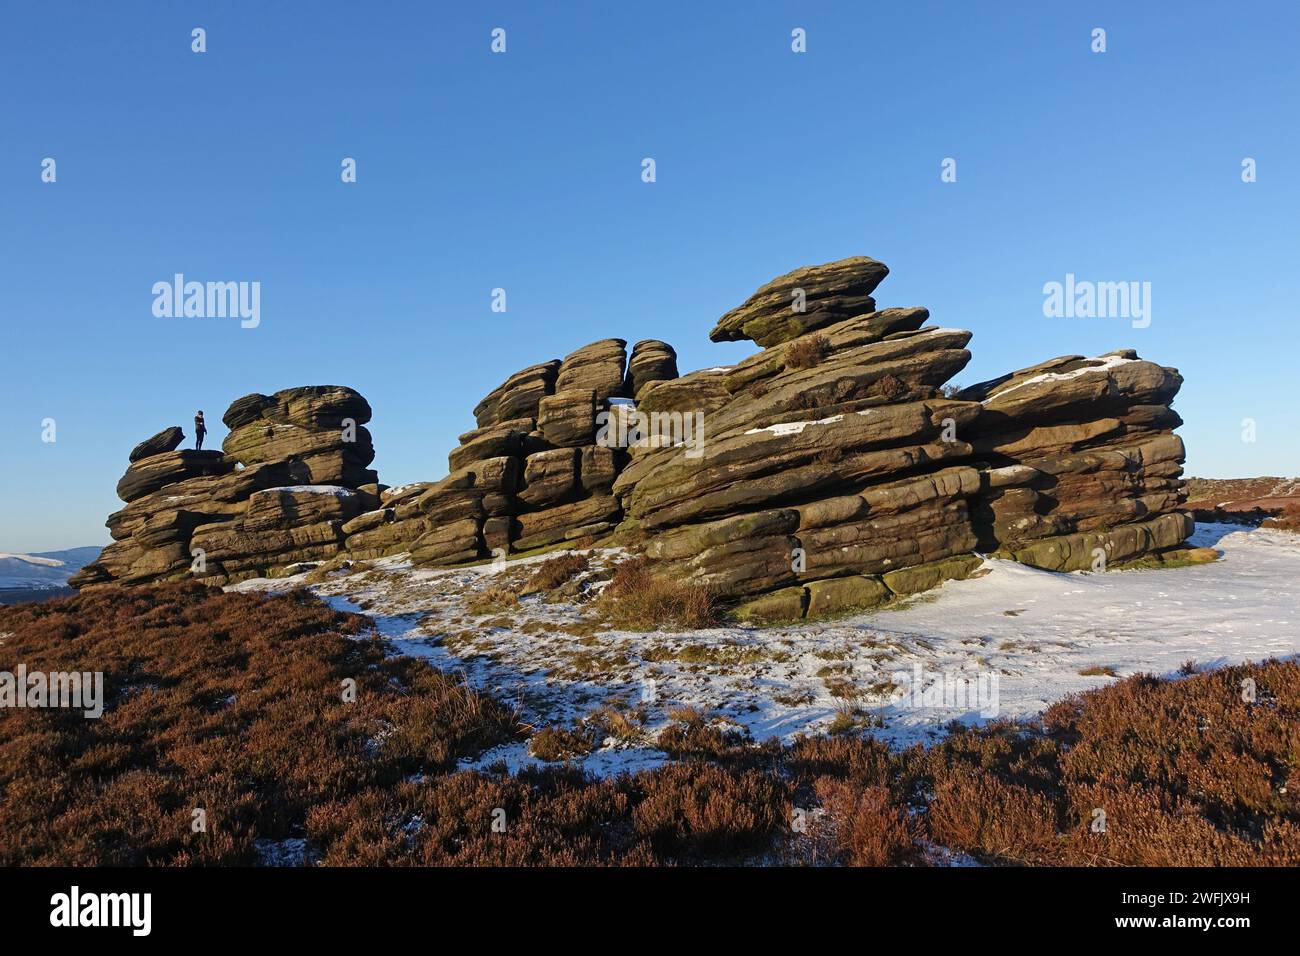 The Wheel Stones, also known as the Coach and Horses, an amazing rock formation on Derwent Edge, Peak District, UK Stock Photo